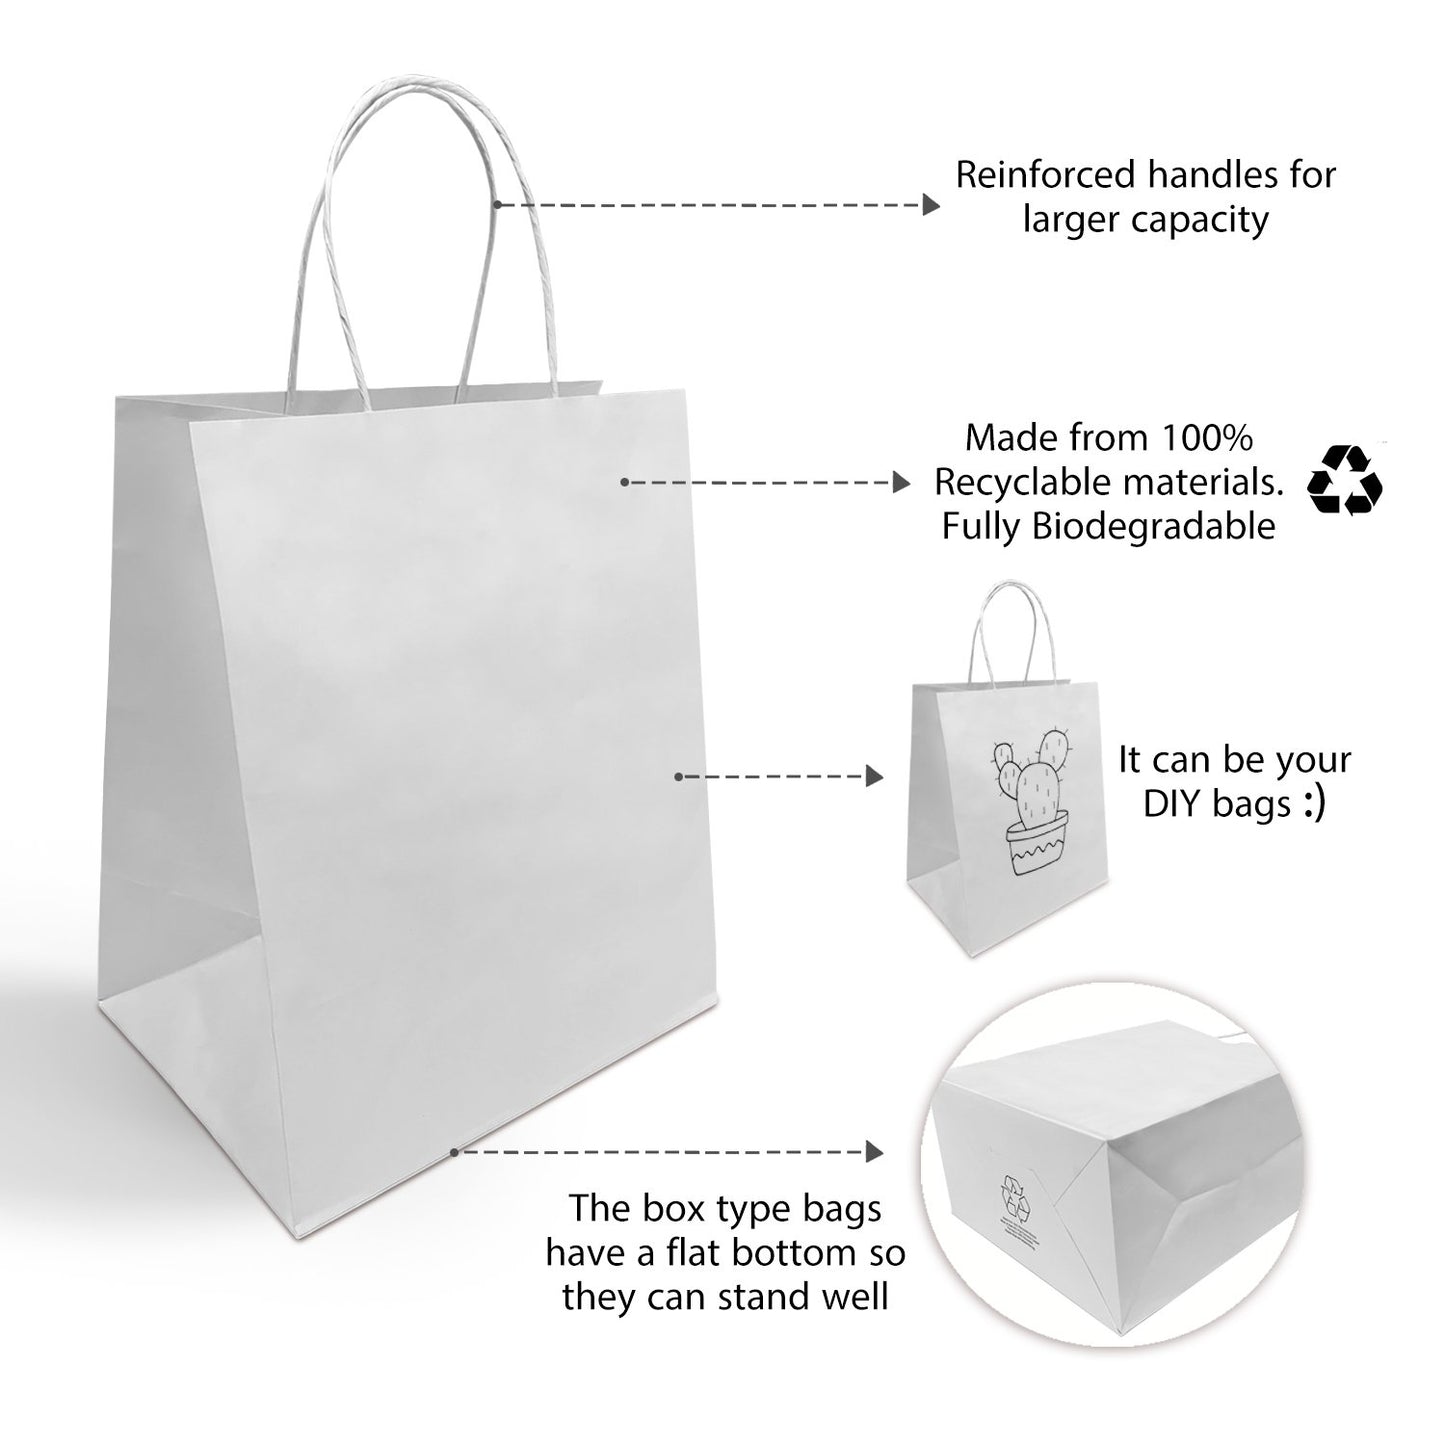 250 Pcs, Bistro, 10x6.75x12 inches, White Paper Bags, with Twisted Handle